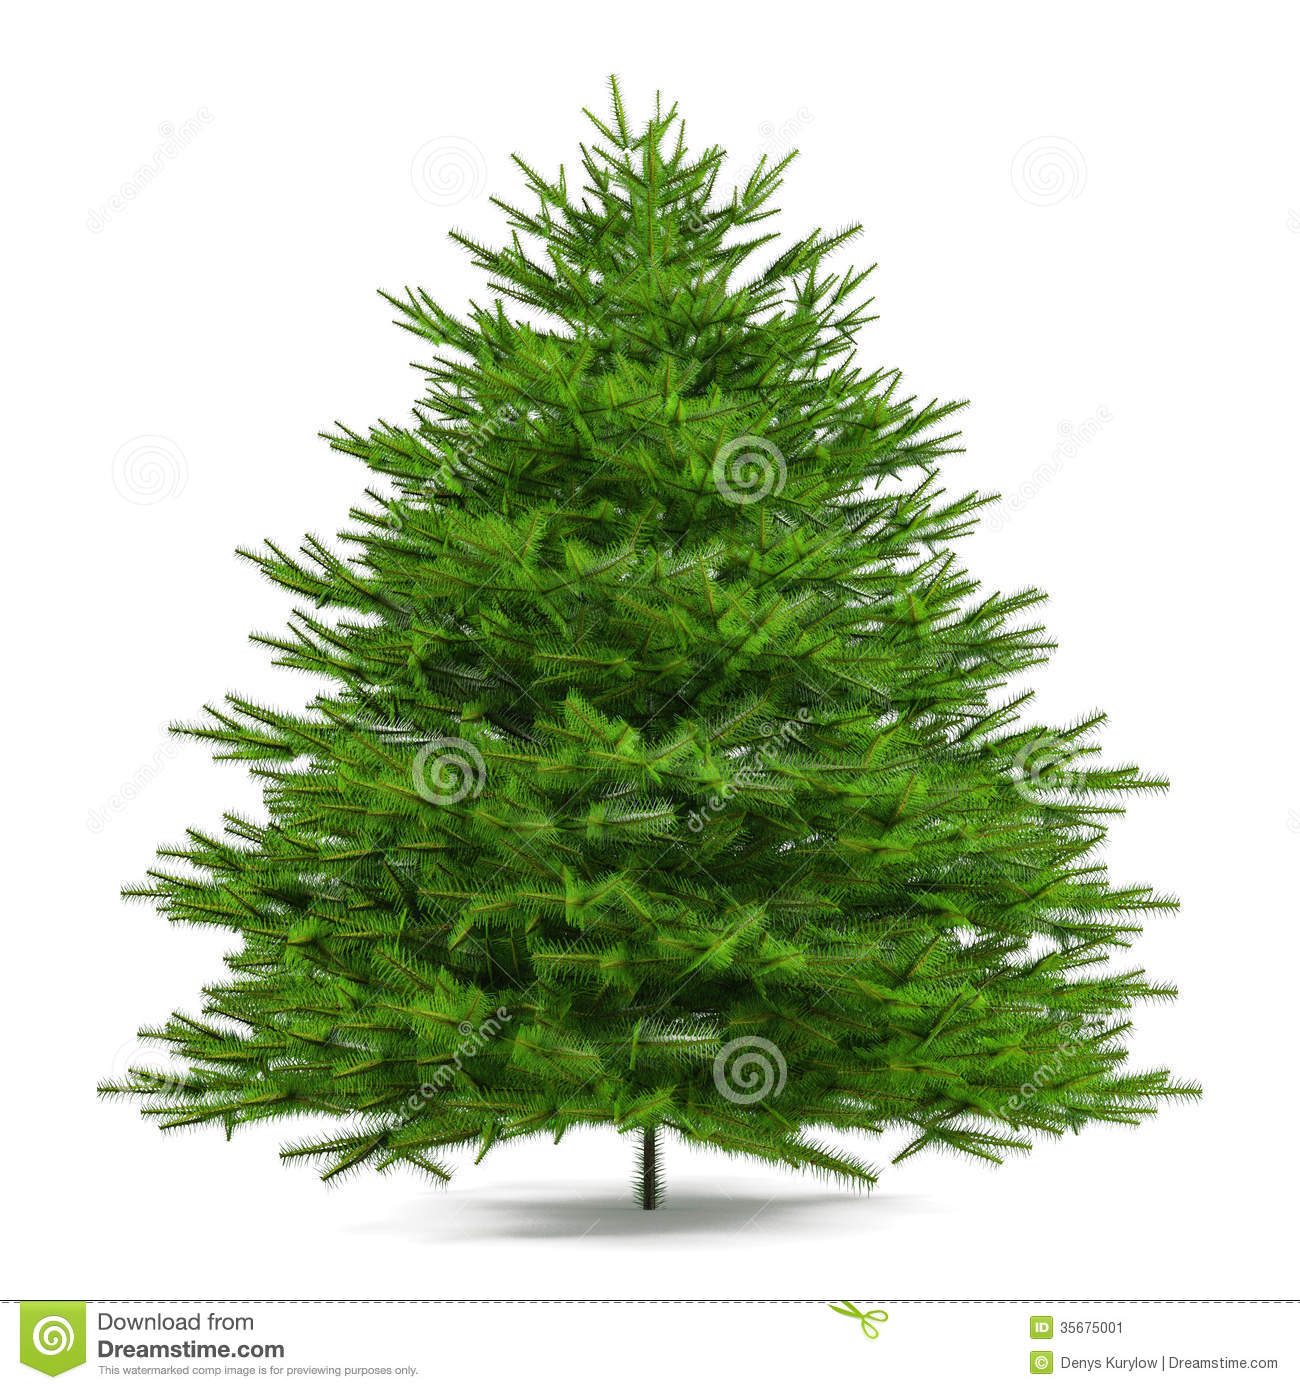 Pine Tree Backgrounds on Wallpapers Vista